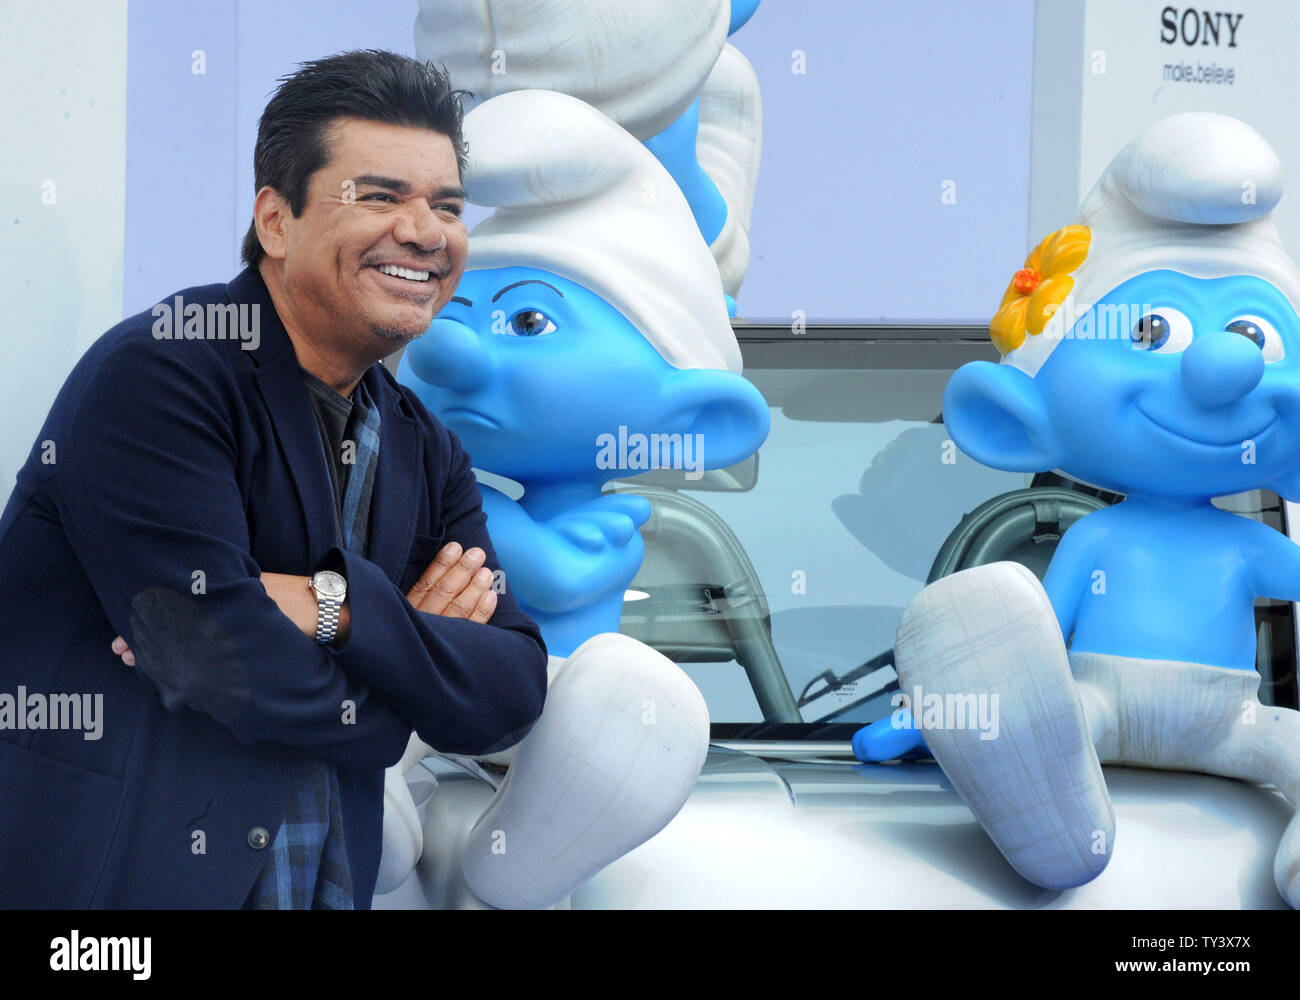 Actor and comedian George Lopez, the voice of Grouchy Smurf in the motion picture animated comedy 'The Smurfs 2', attends the premiere of the film at the Regency Village Theatre, in the Westwood section of Los Angeles on July 28, 2013. The Smurfs join forces with their human friends to rescue Smurfette, who has been kidnapped by Gargamel since she knows a secret spell that can turn the evil sorcerer's newest creation - creatures called the Naughties - into real Smurfs.  UPI/Jim Ruymen Stock Photo